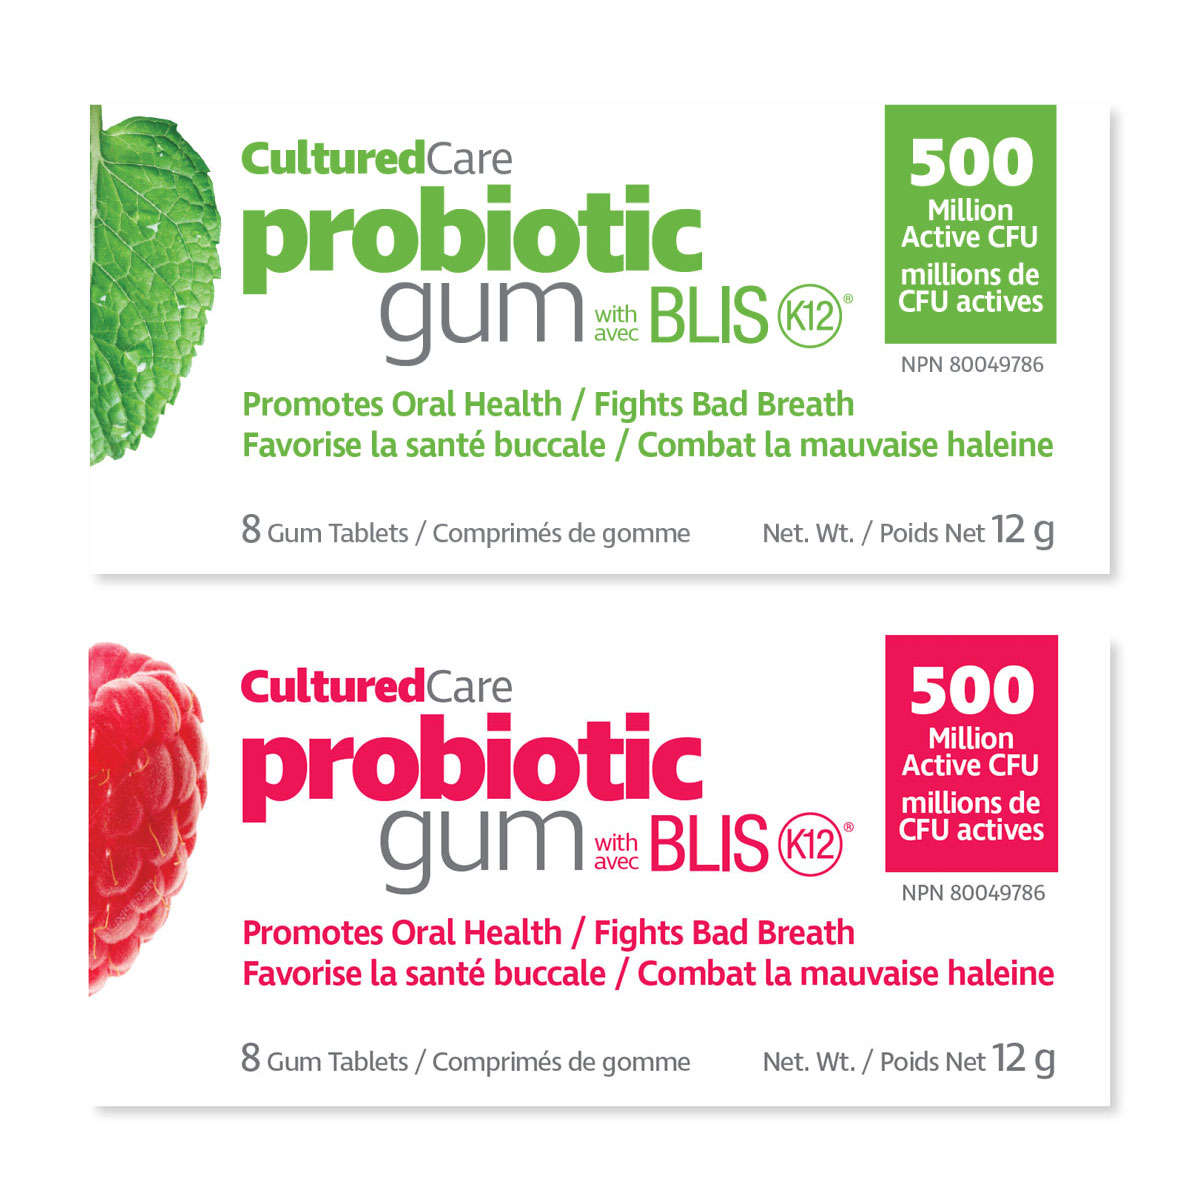 Featured image for “CulturedCare <br>Probiotic Gum with BlisK12”